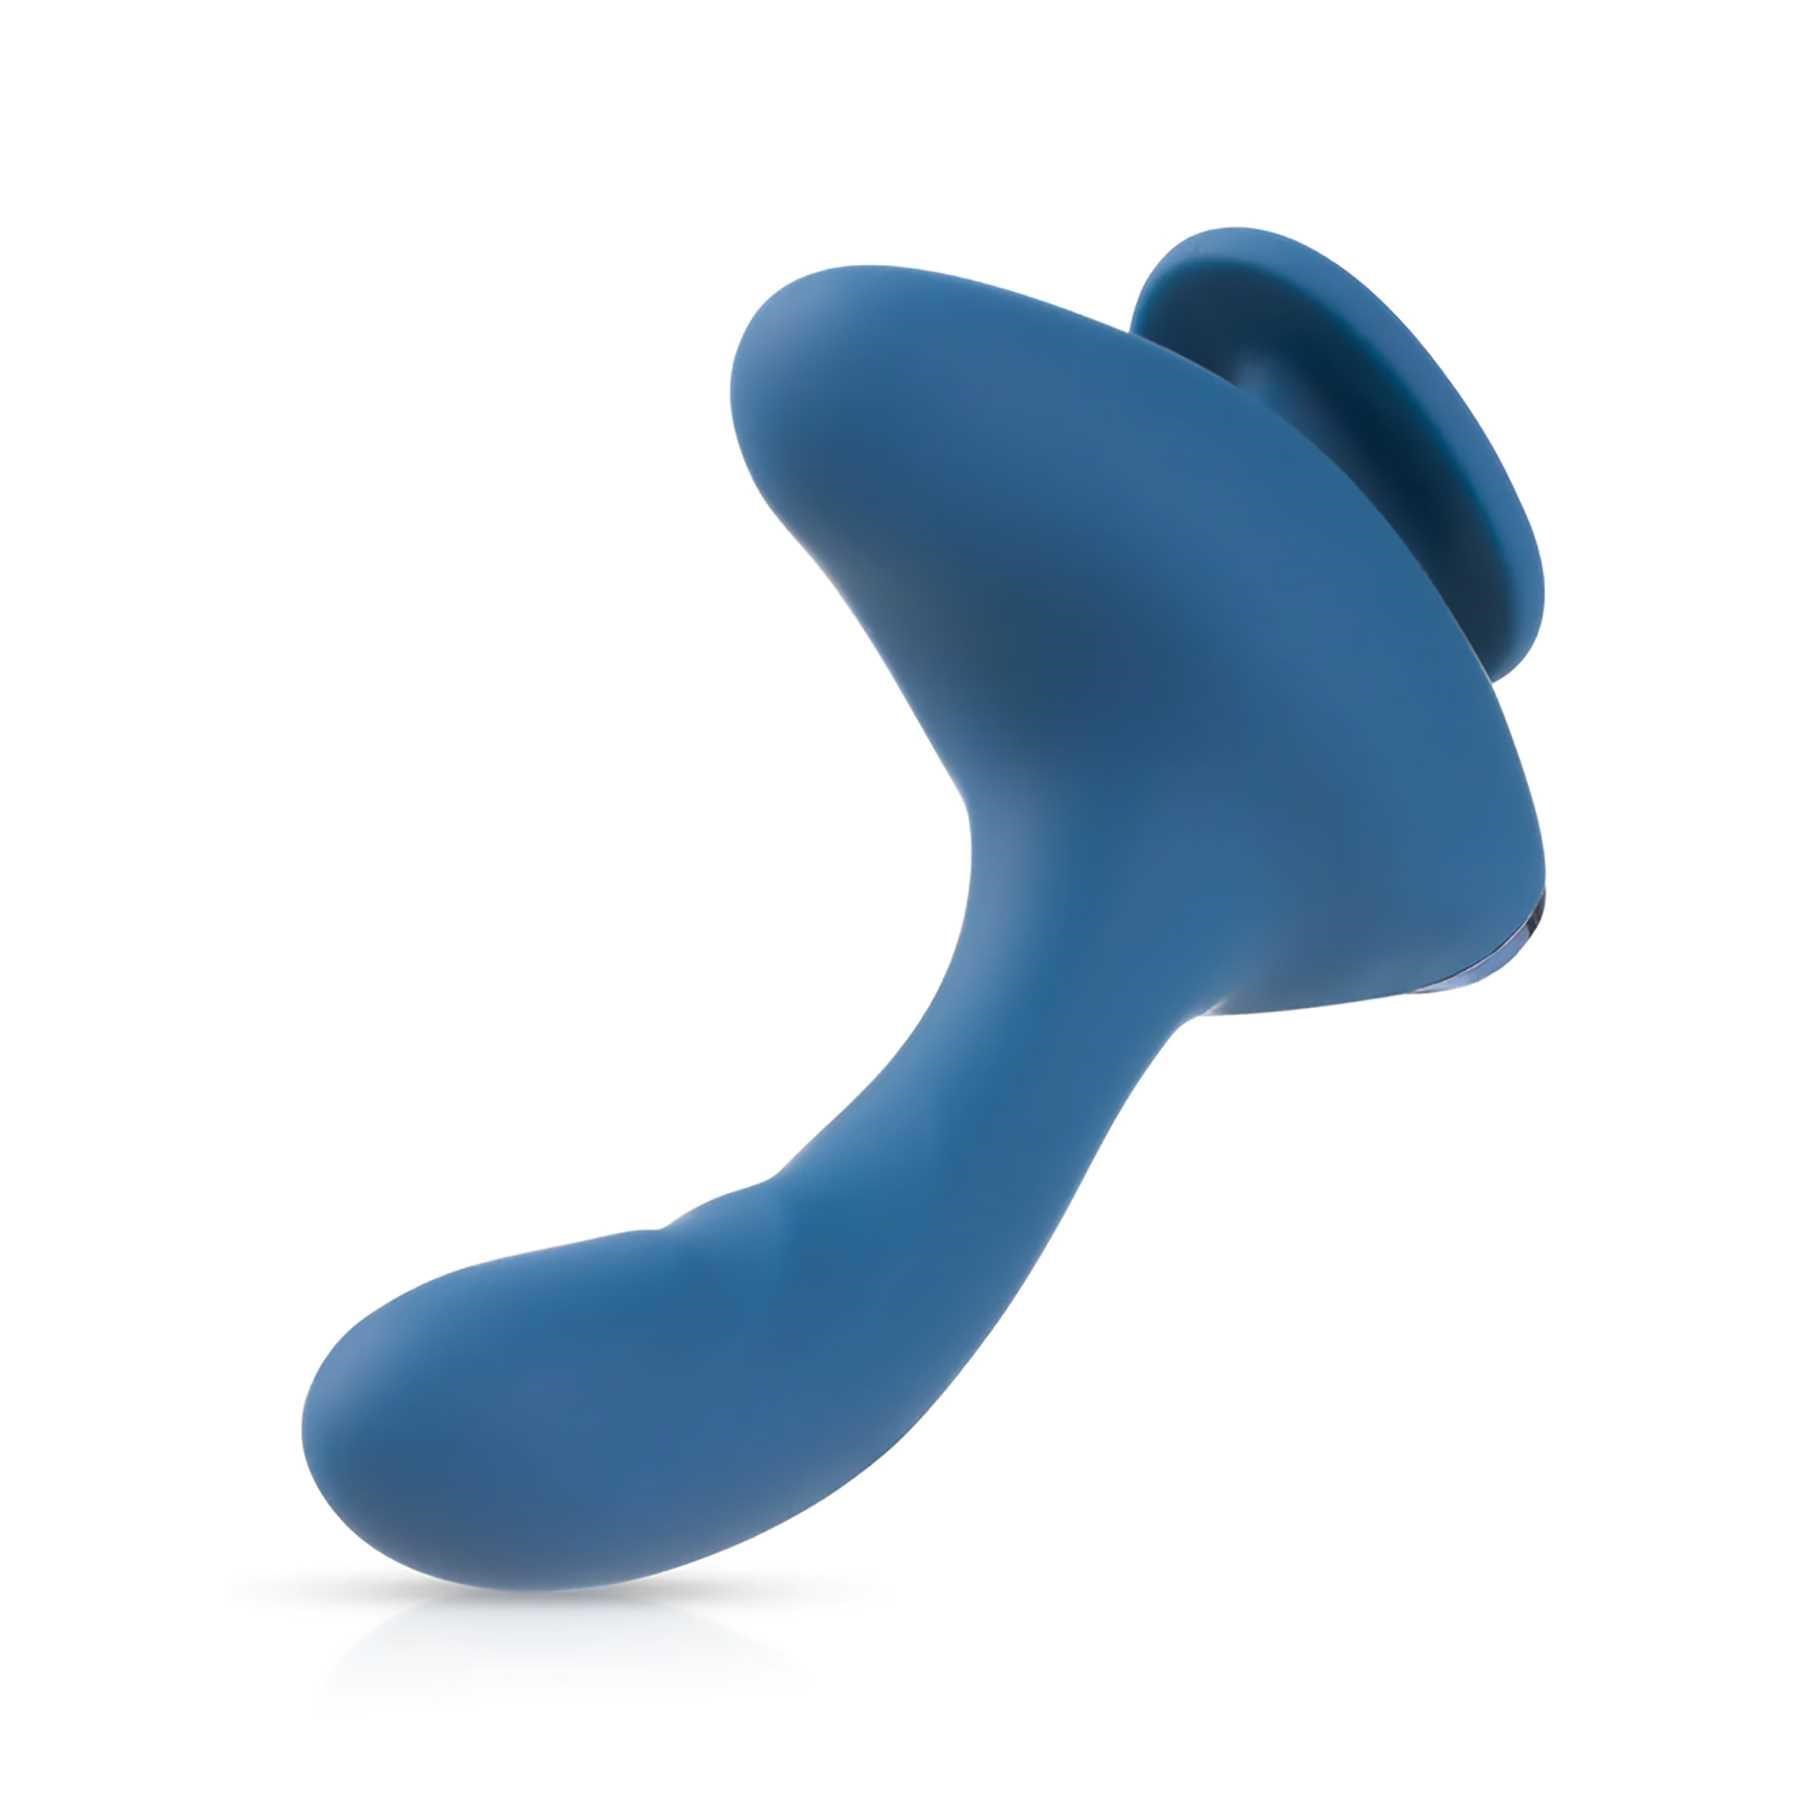 JIMMY JANE SOLIS KYRIOS P-SPOT MASSAGER laying on table